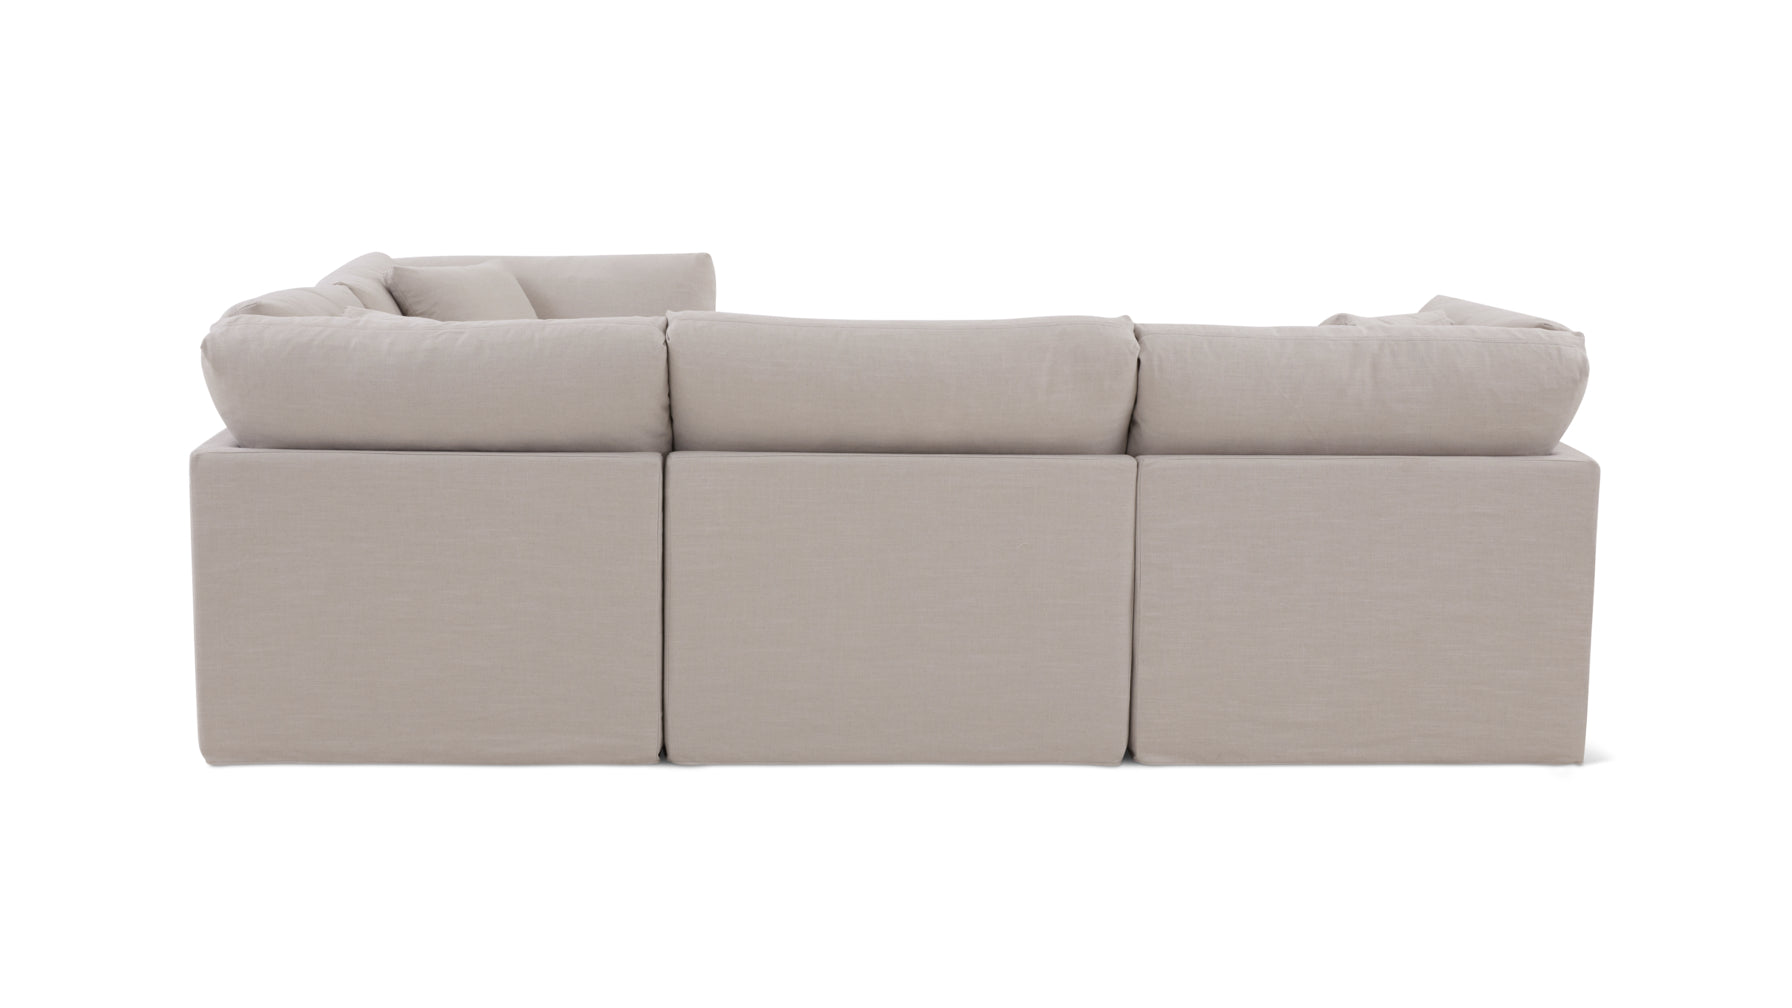 Get Together™ 4-Piece Modular Sectional Closed, Standard, Clay - Image 7